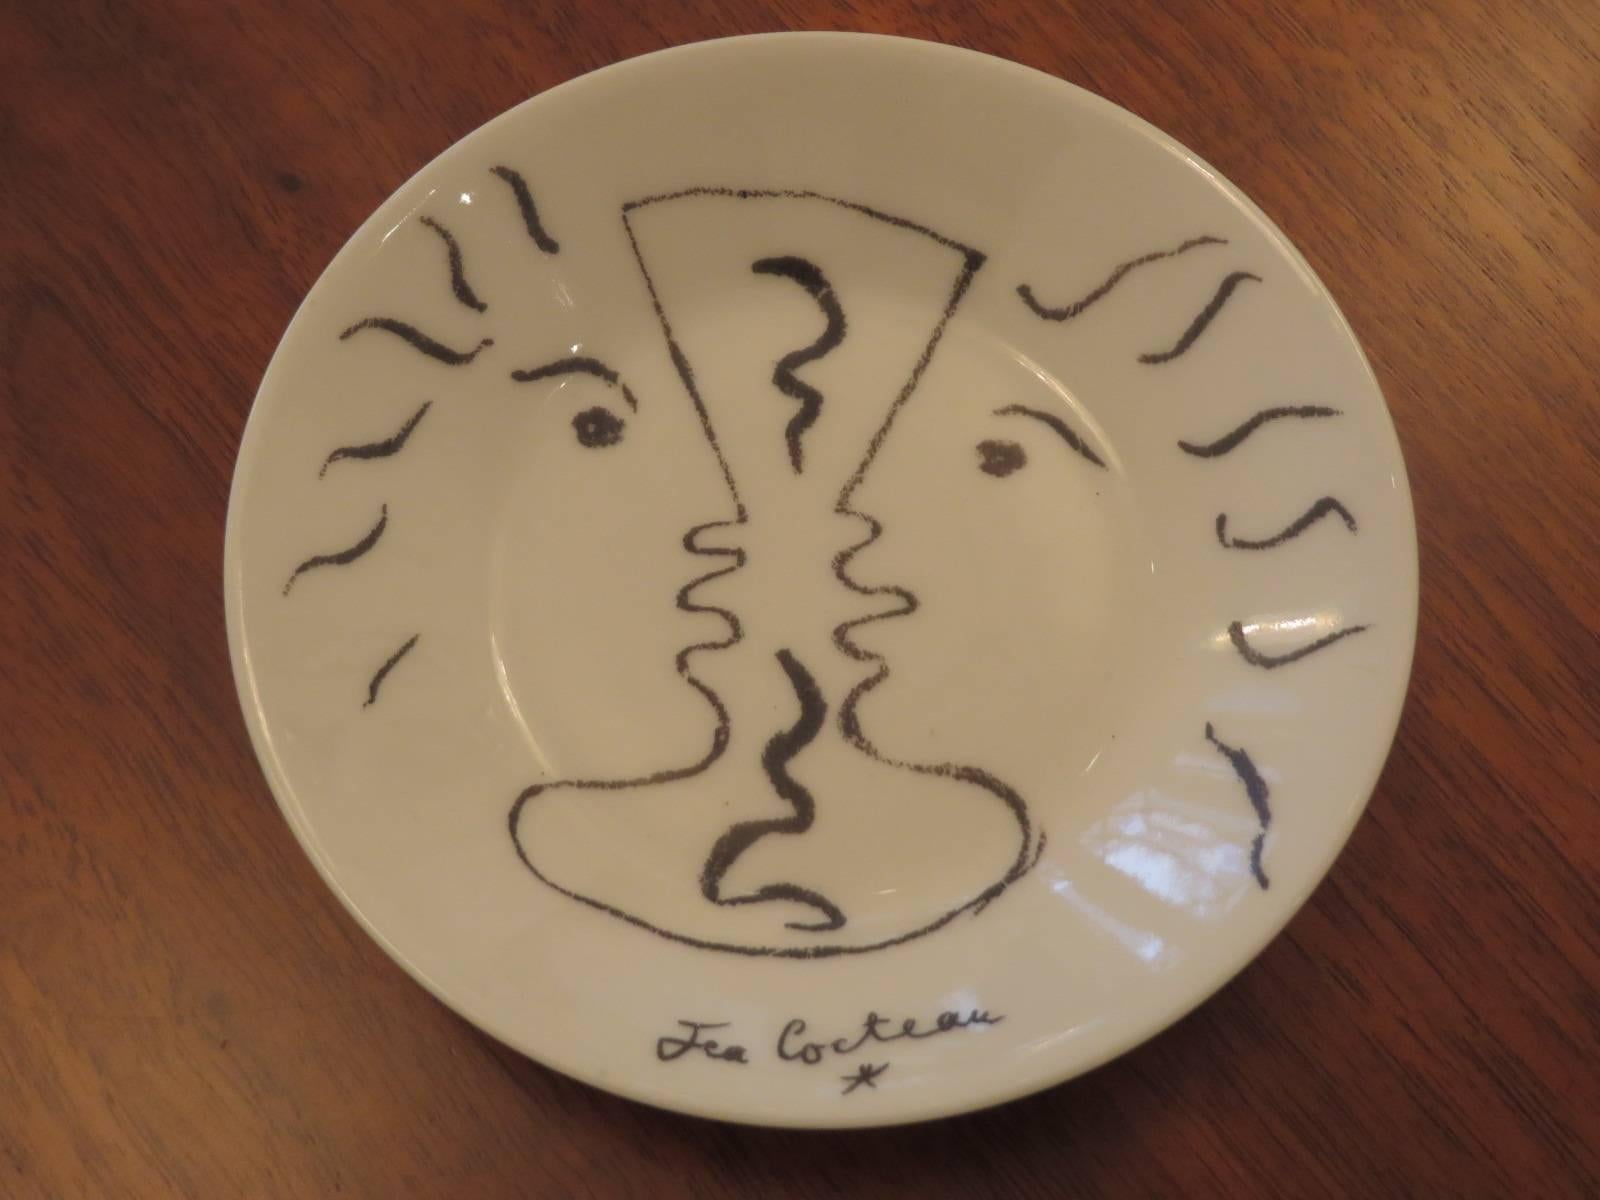 Mid-Century Modern Demitasse Cup and Saucer Designed by Jean Cocteau